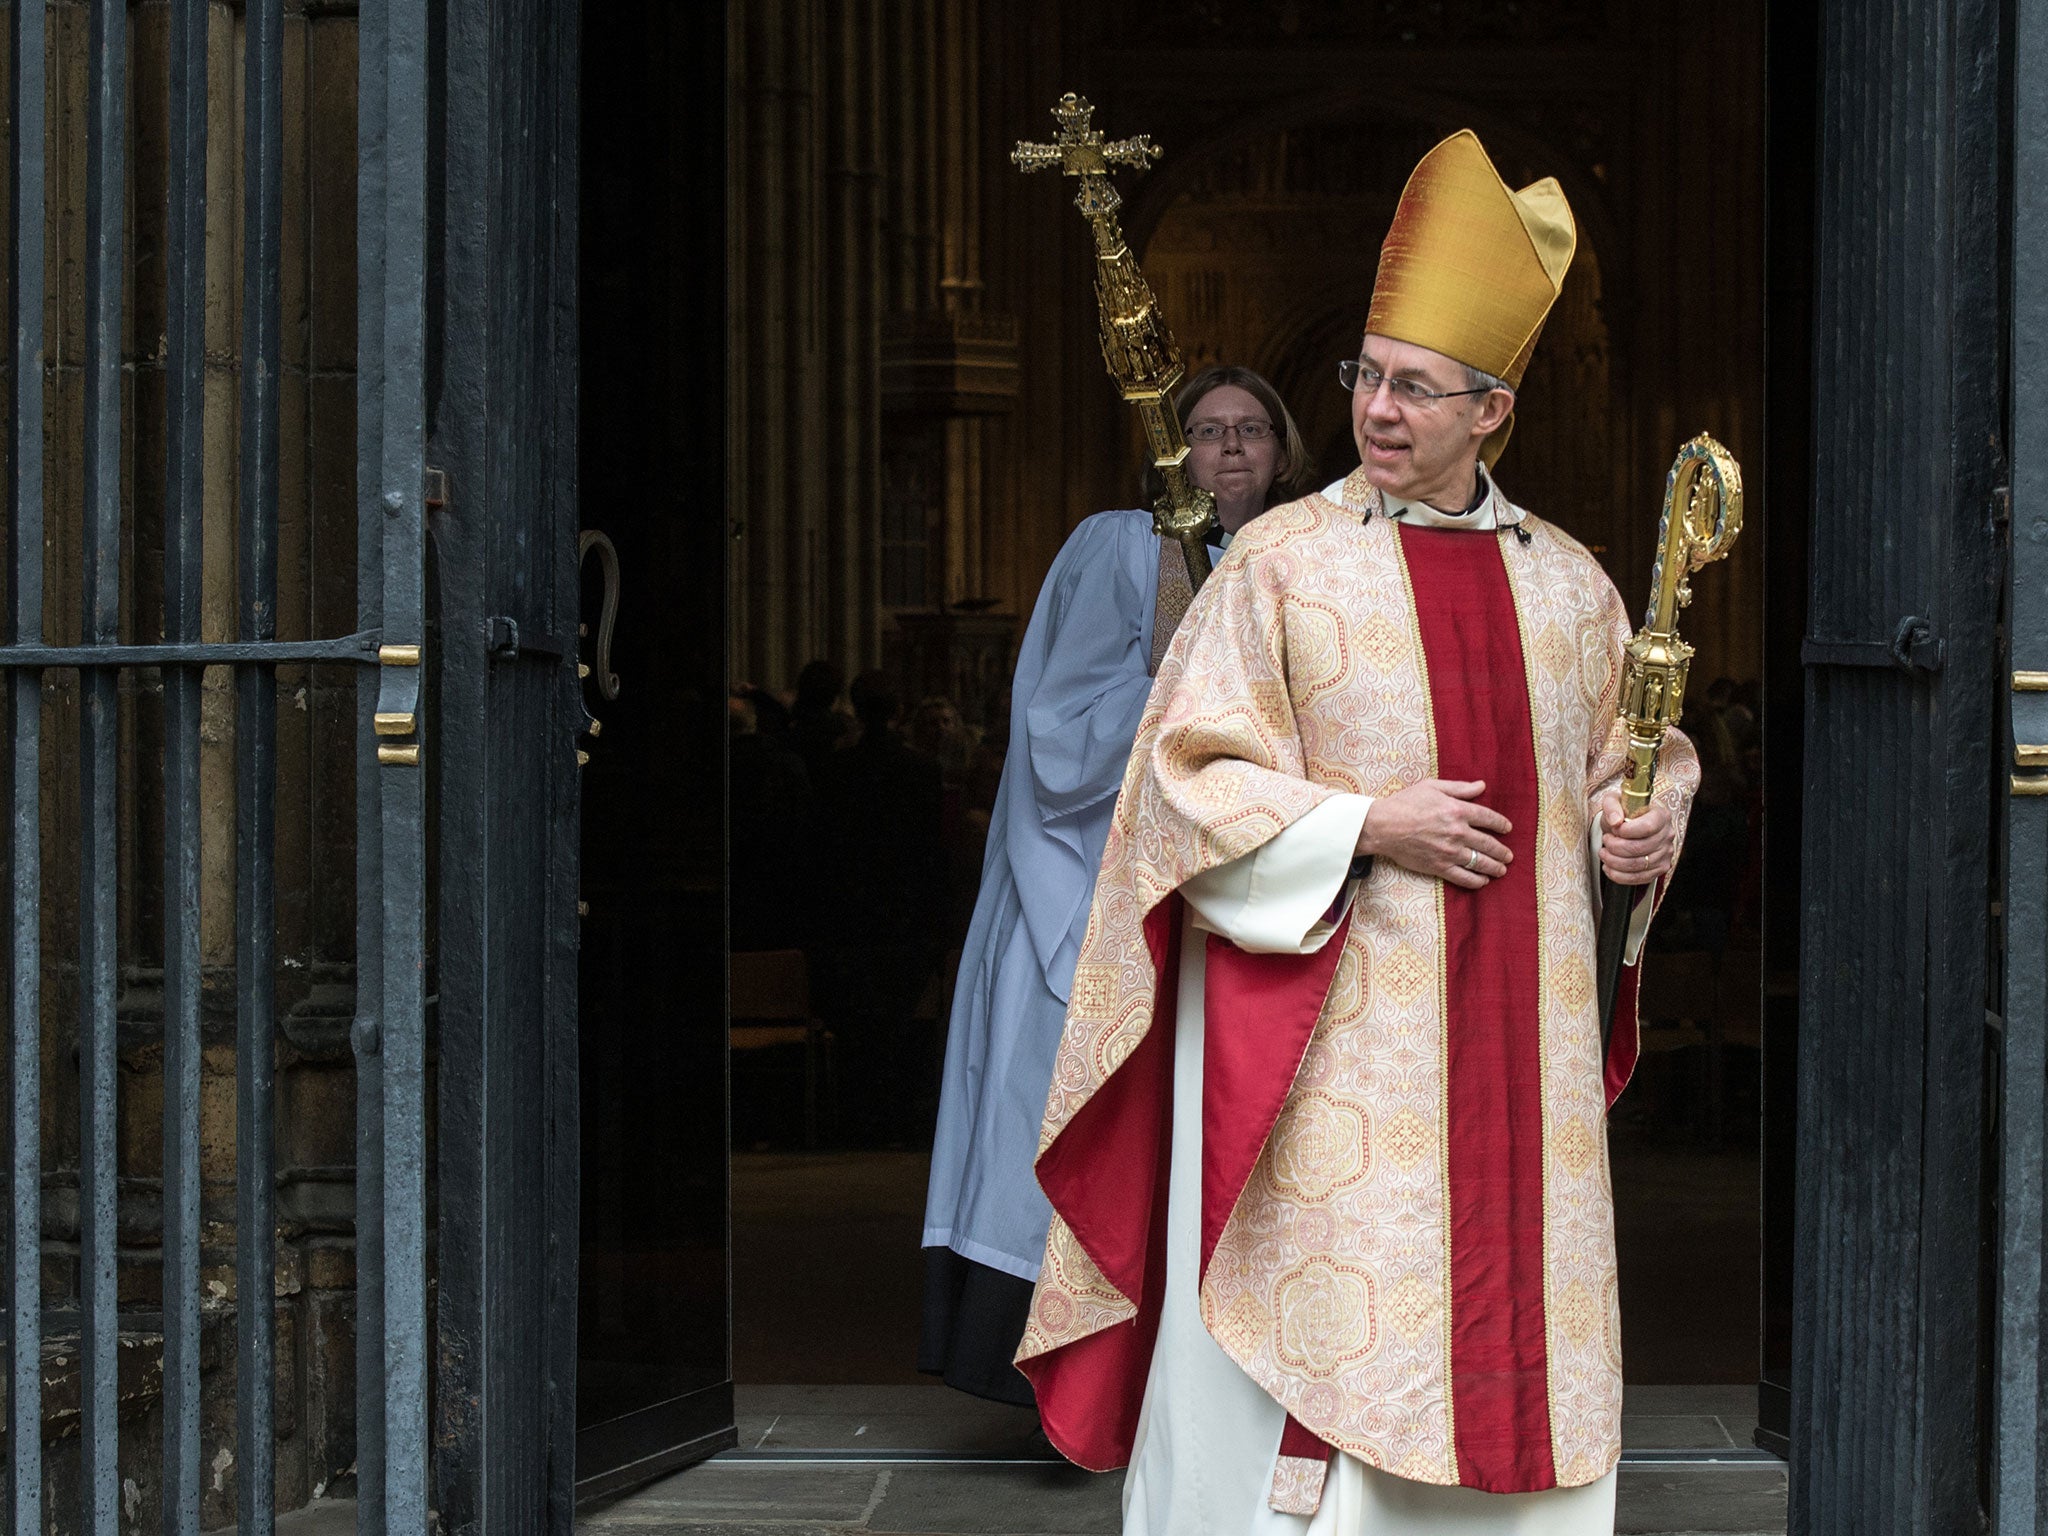 Justin Welby has been criticised for the comments